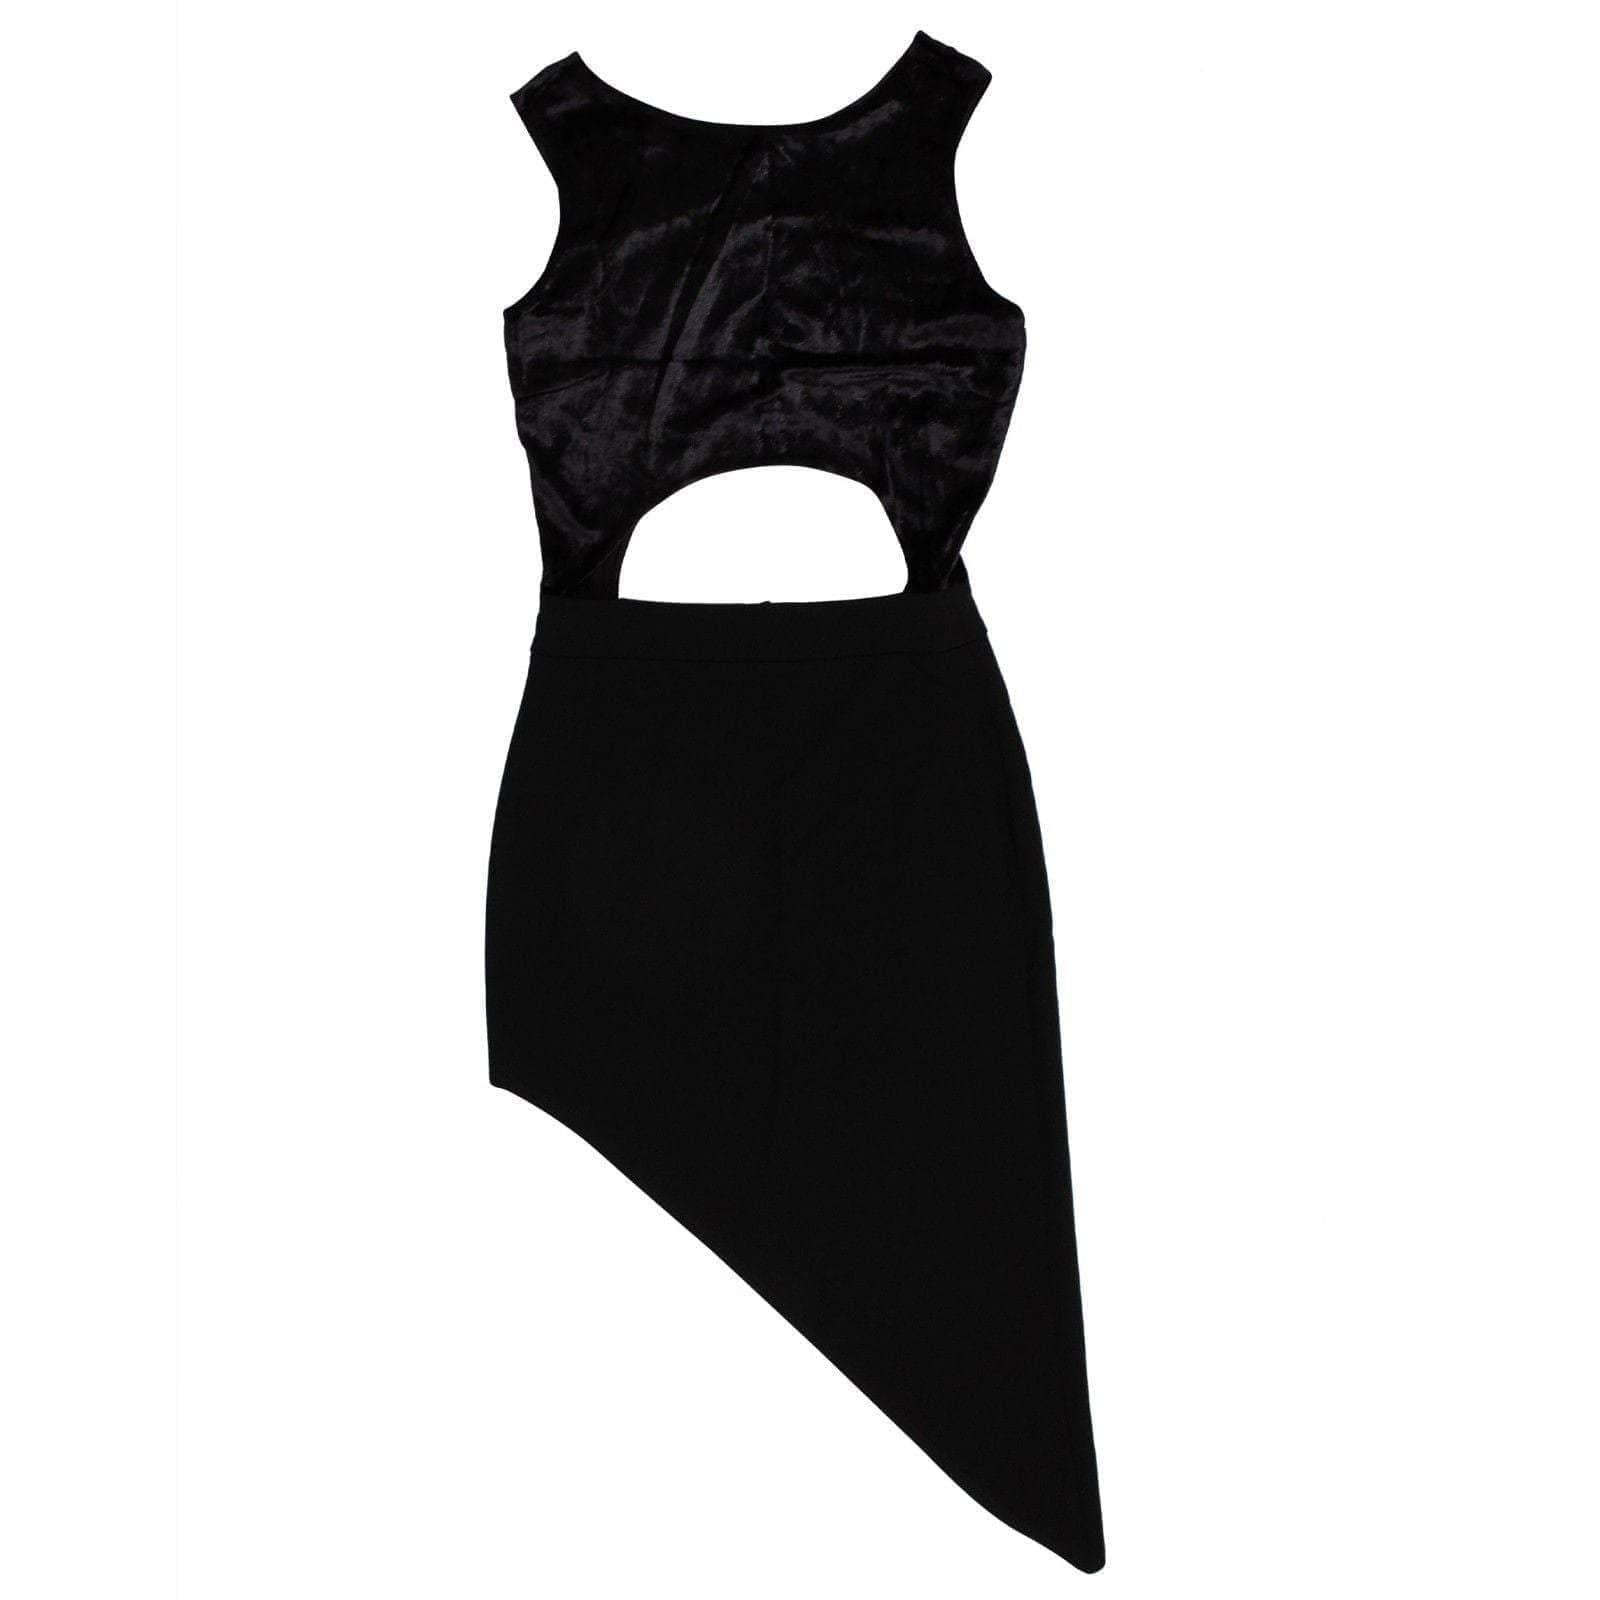 Baja East 250-500, 326WRTW, baja-east, couponcollection, dresses, gender-womens, main-clothing, size-xs XS Galaxy Cut Out Dress - Black 58LE-1611/1 58LE-1611/1